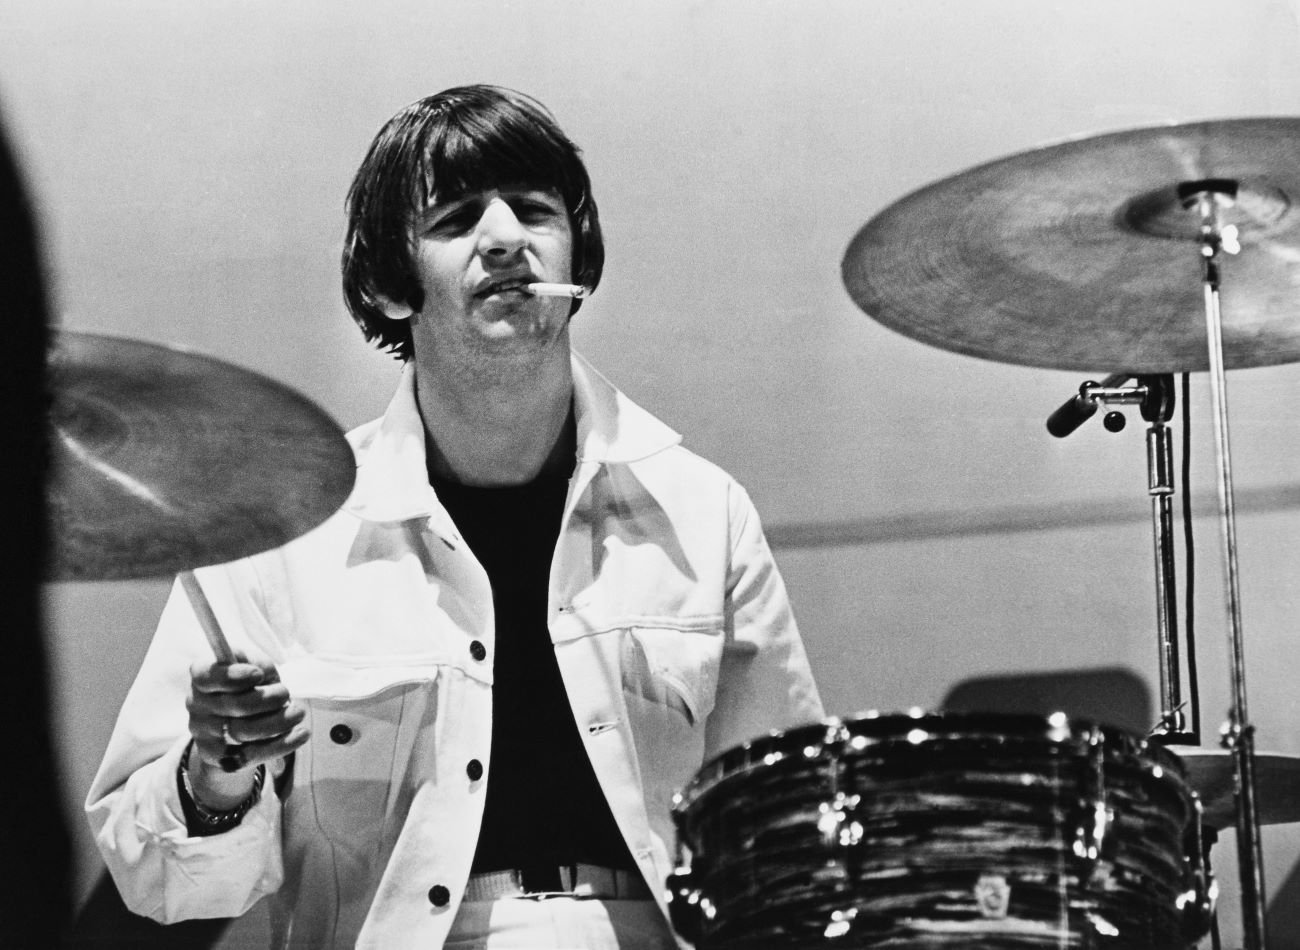 A black and white picture of Ringo Starr sitting at a drumkit with a cigarette.